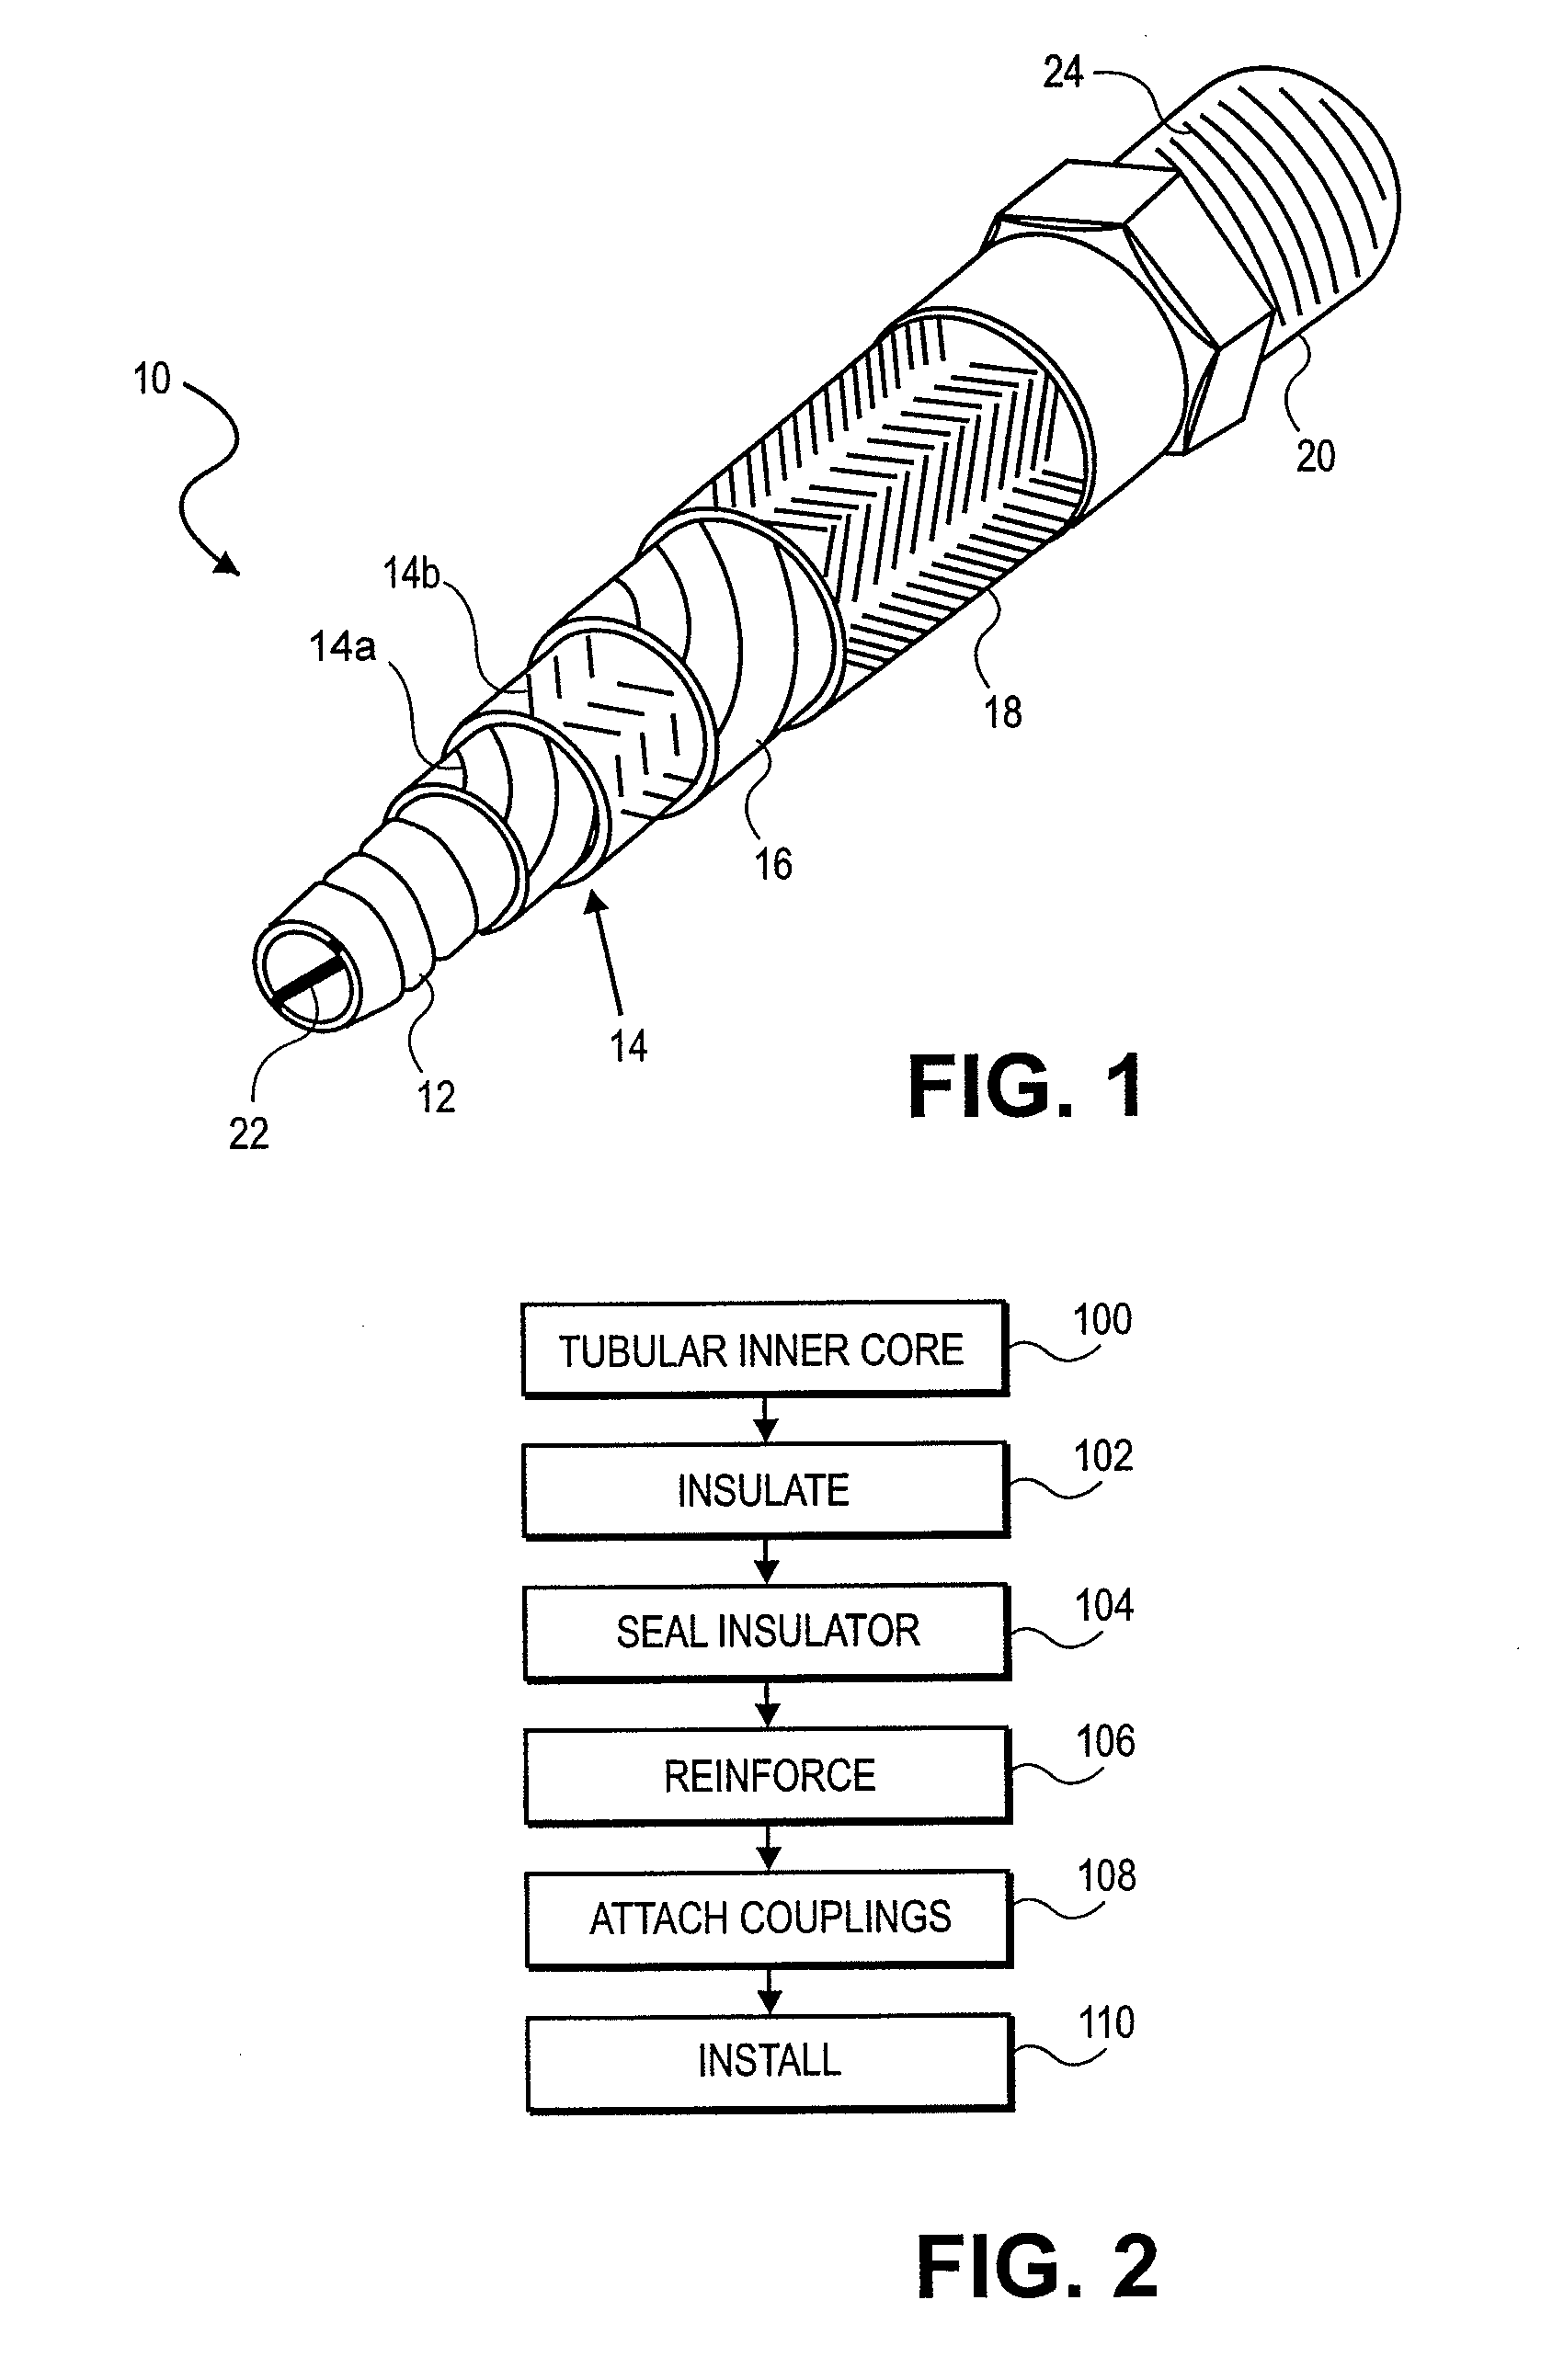 Insulated hose assembly and method of manufacture